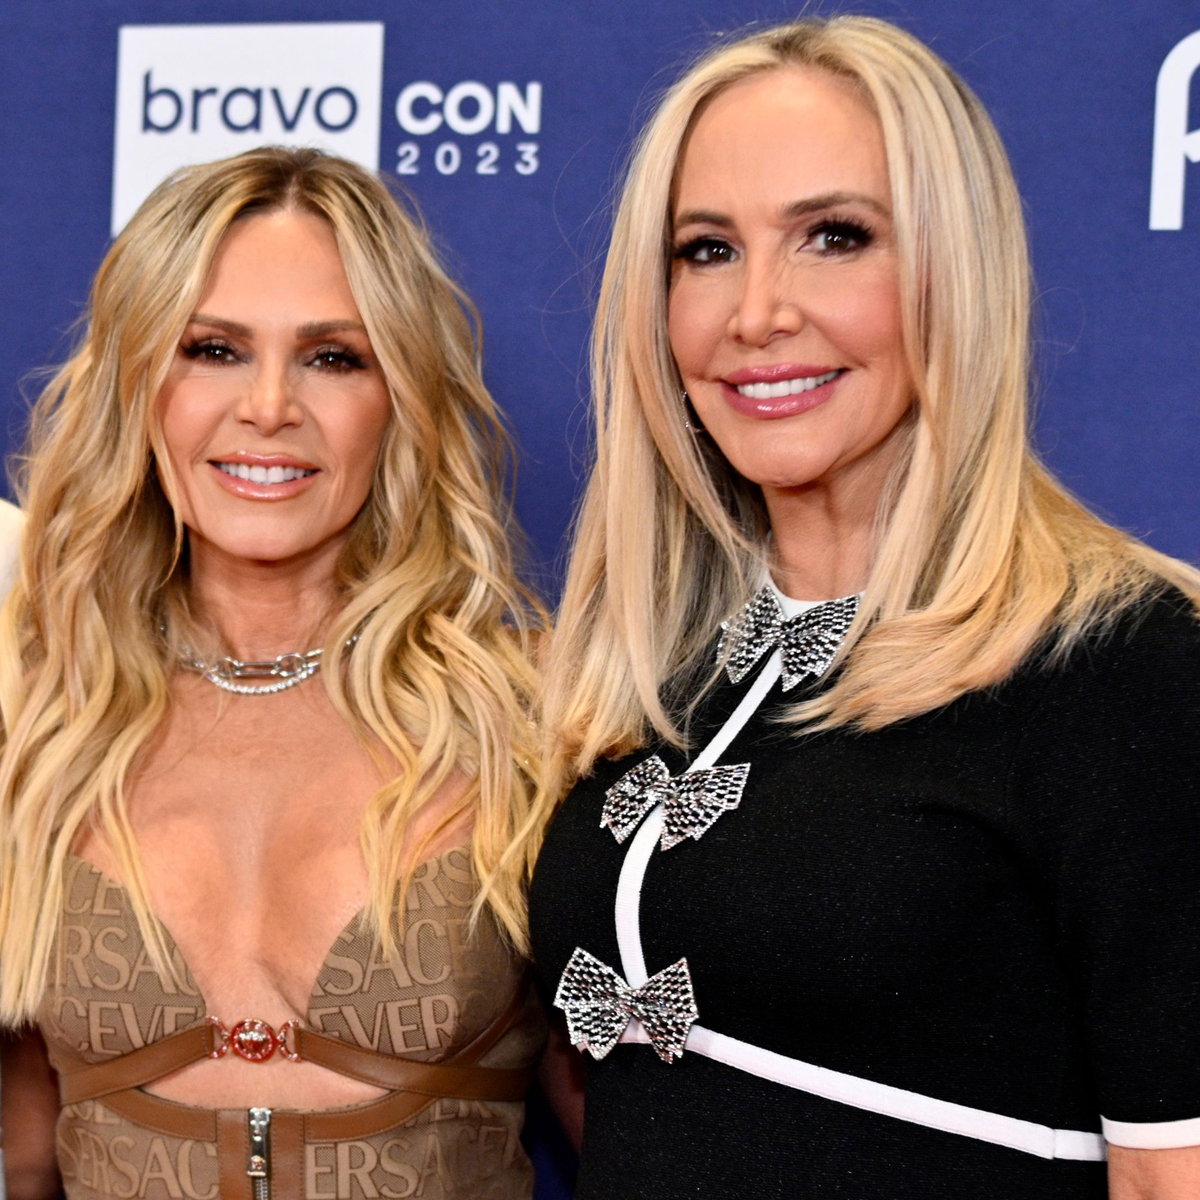 RHOC’s Shannon Beador Slams Tamra Judge for Lack of Support After DUI